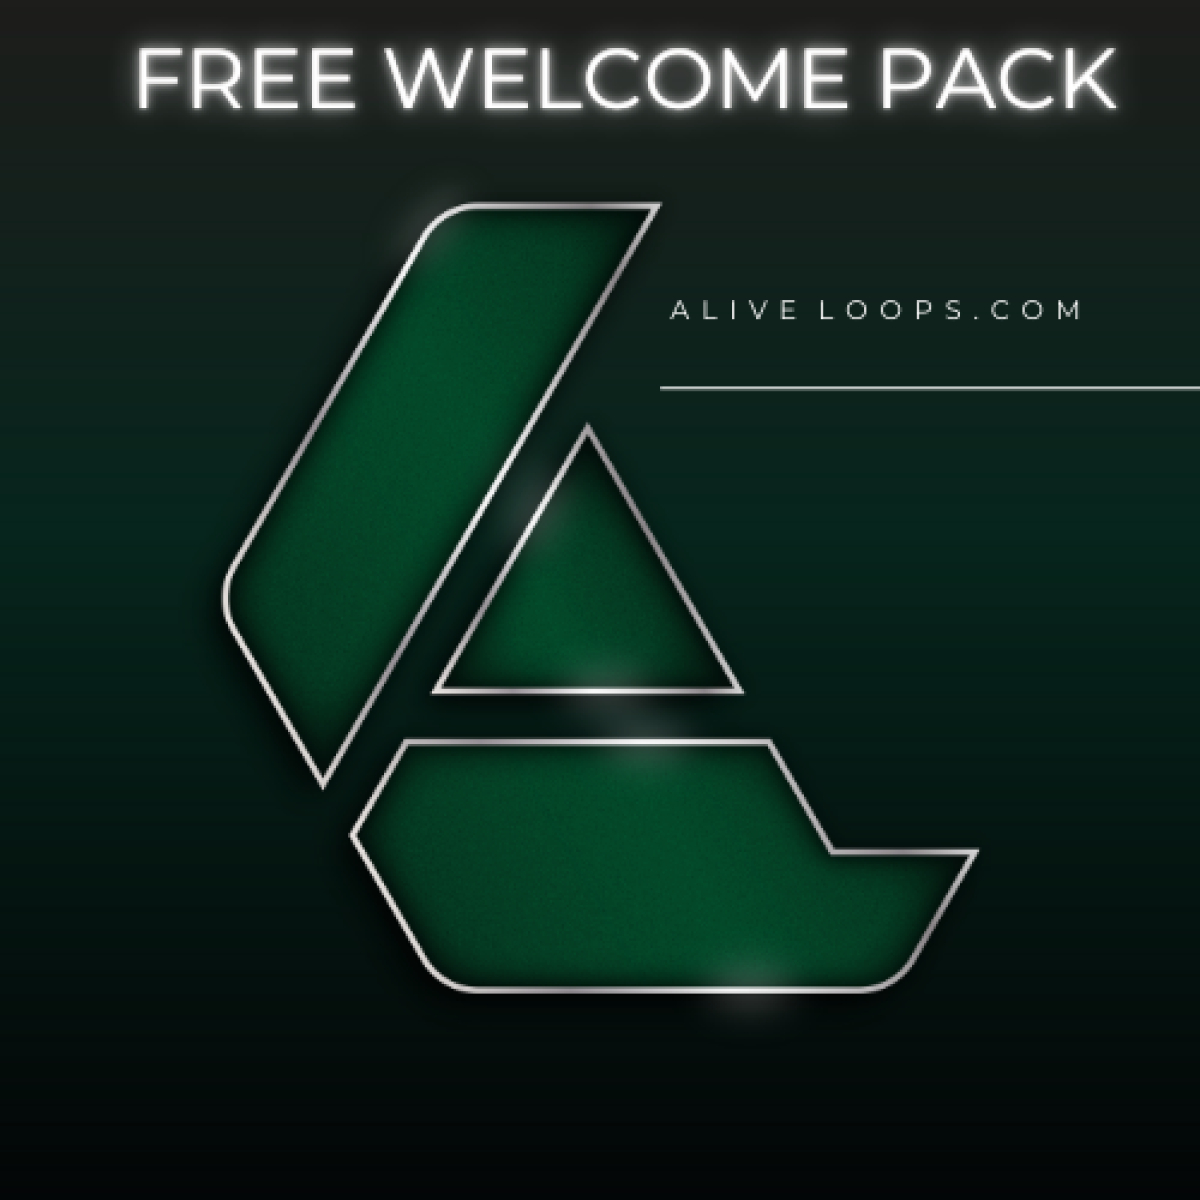 A-Live Loops - FREE WELCOME PACK (pack cover image)